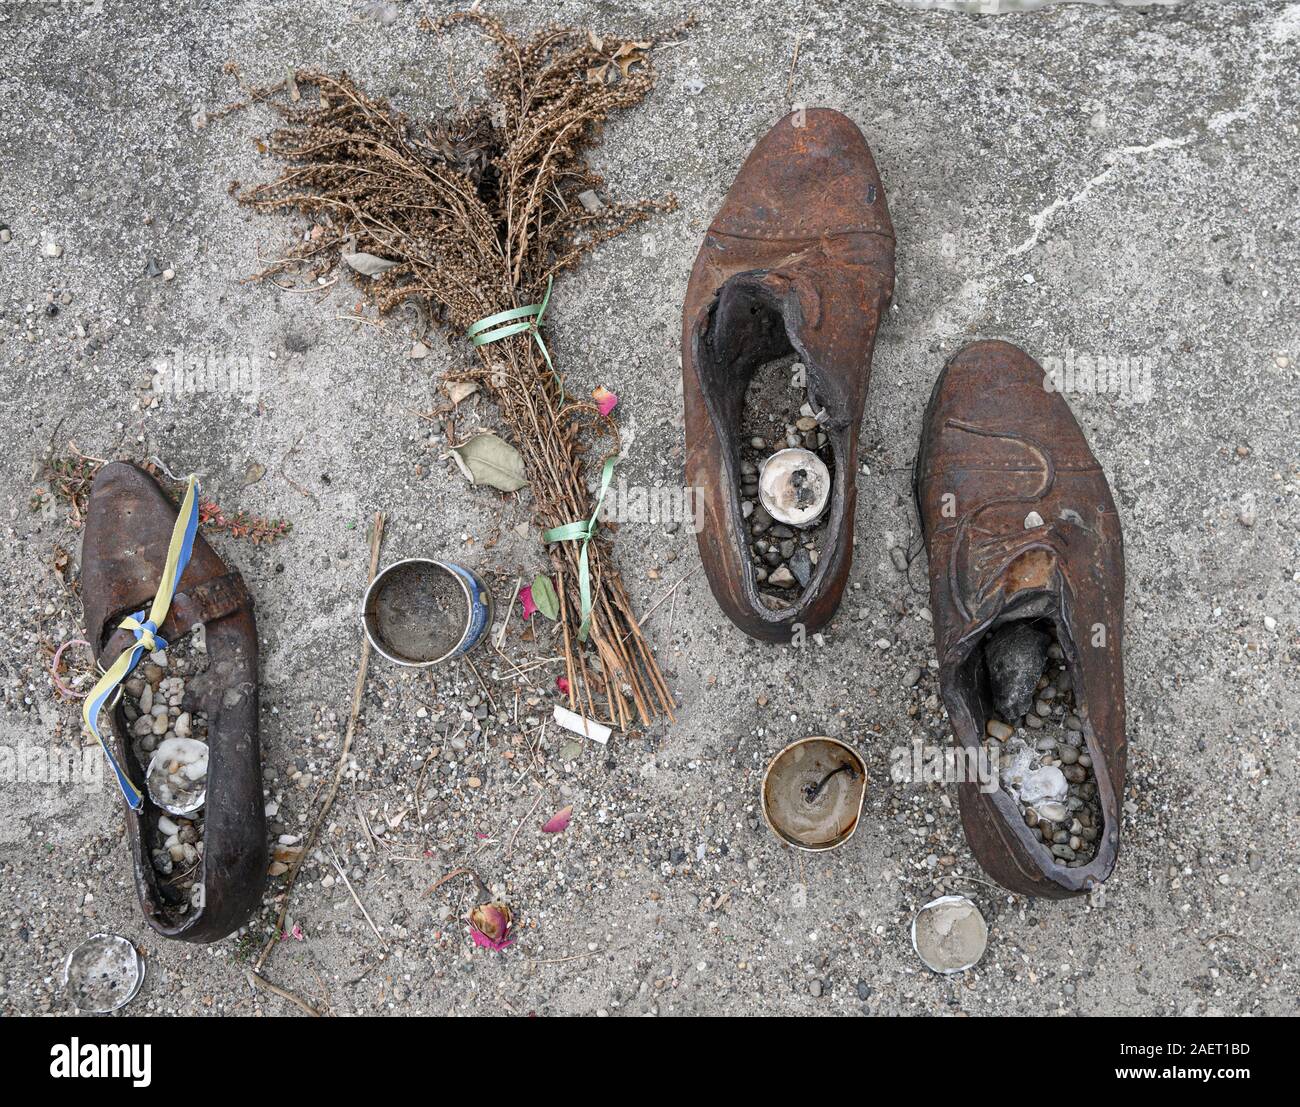 Iron shoes memorial to Jewish people executed WW2 in Budapest Hungary Stock Photo